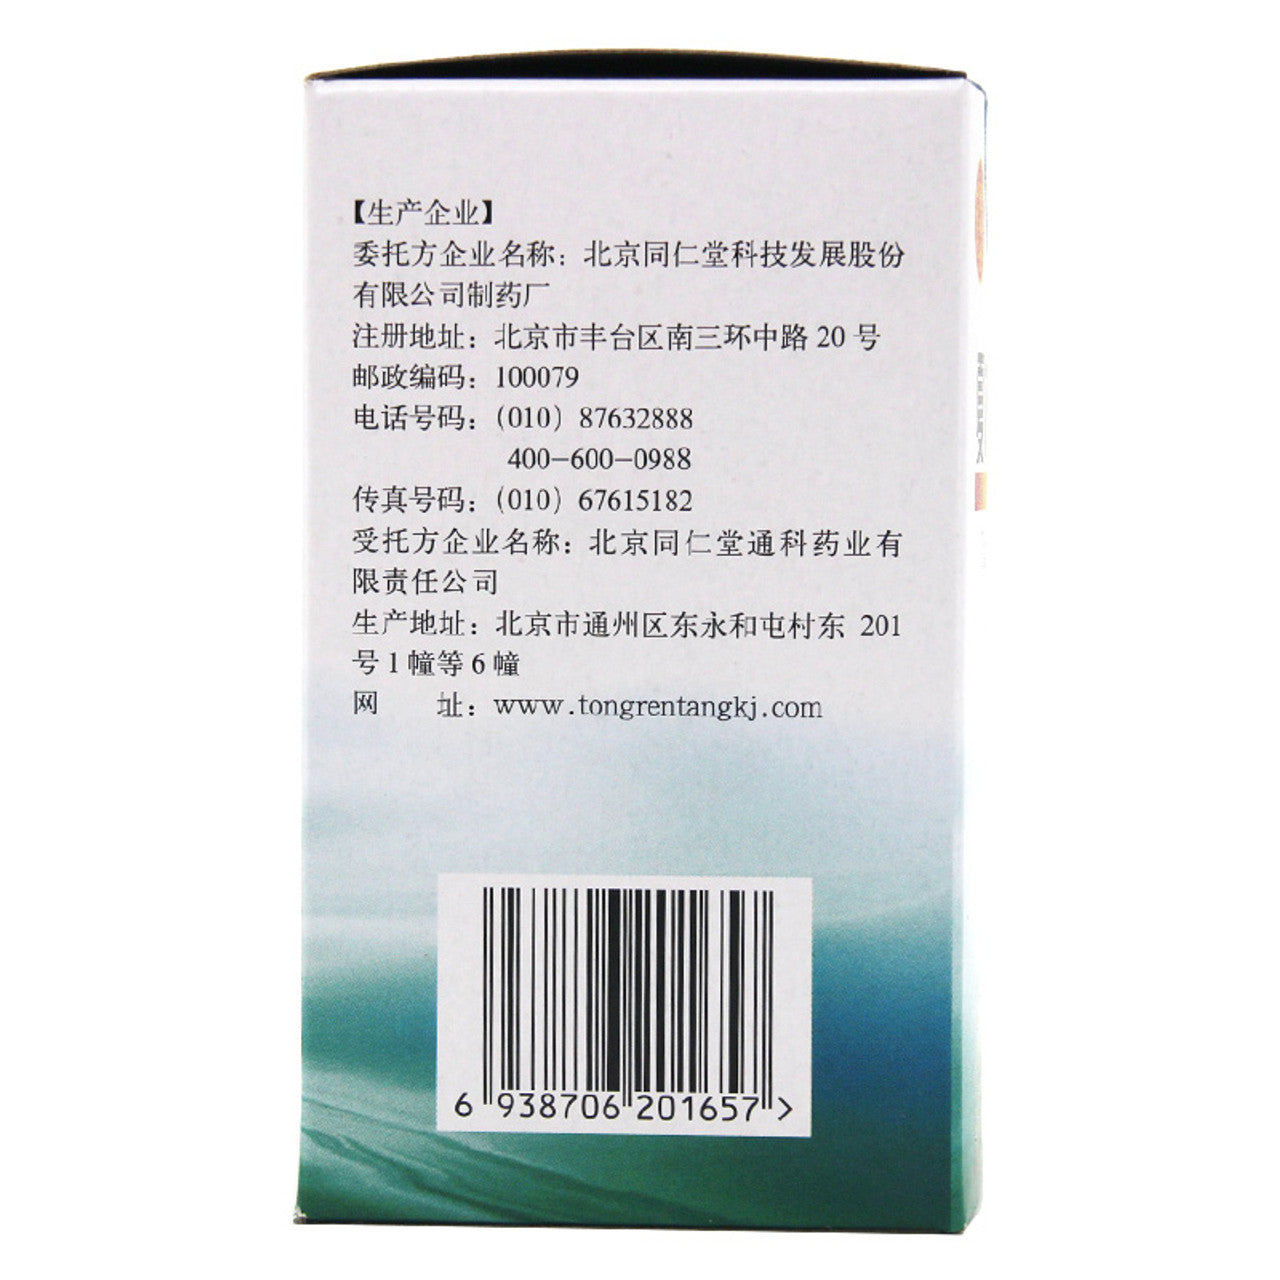 China Herb Syrup. Brand Tongrentang. Xiakucao Gao or Xiakucao Syrup or Xiao Ku Cao Gao or Xia Ku Cao Syrup for goiter, lymphatic tuberculosis, and hyperplasia of mammary glands caused by internal accumulation of heat.